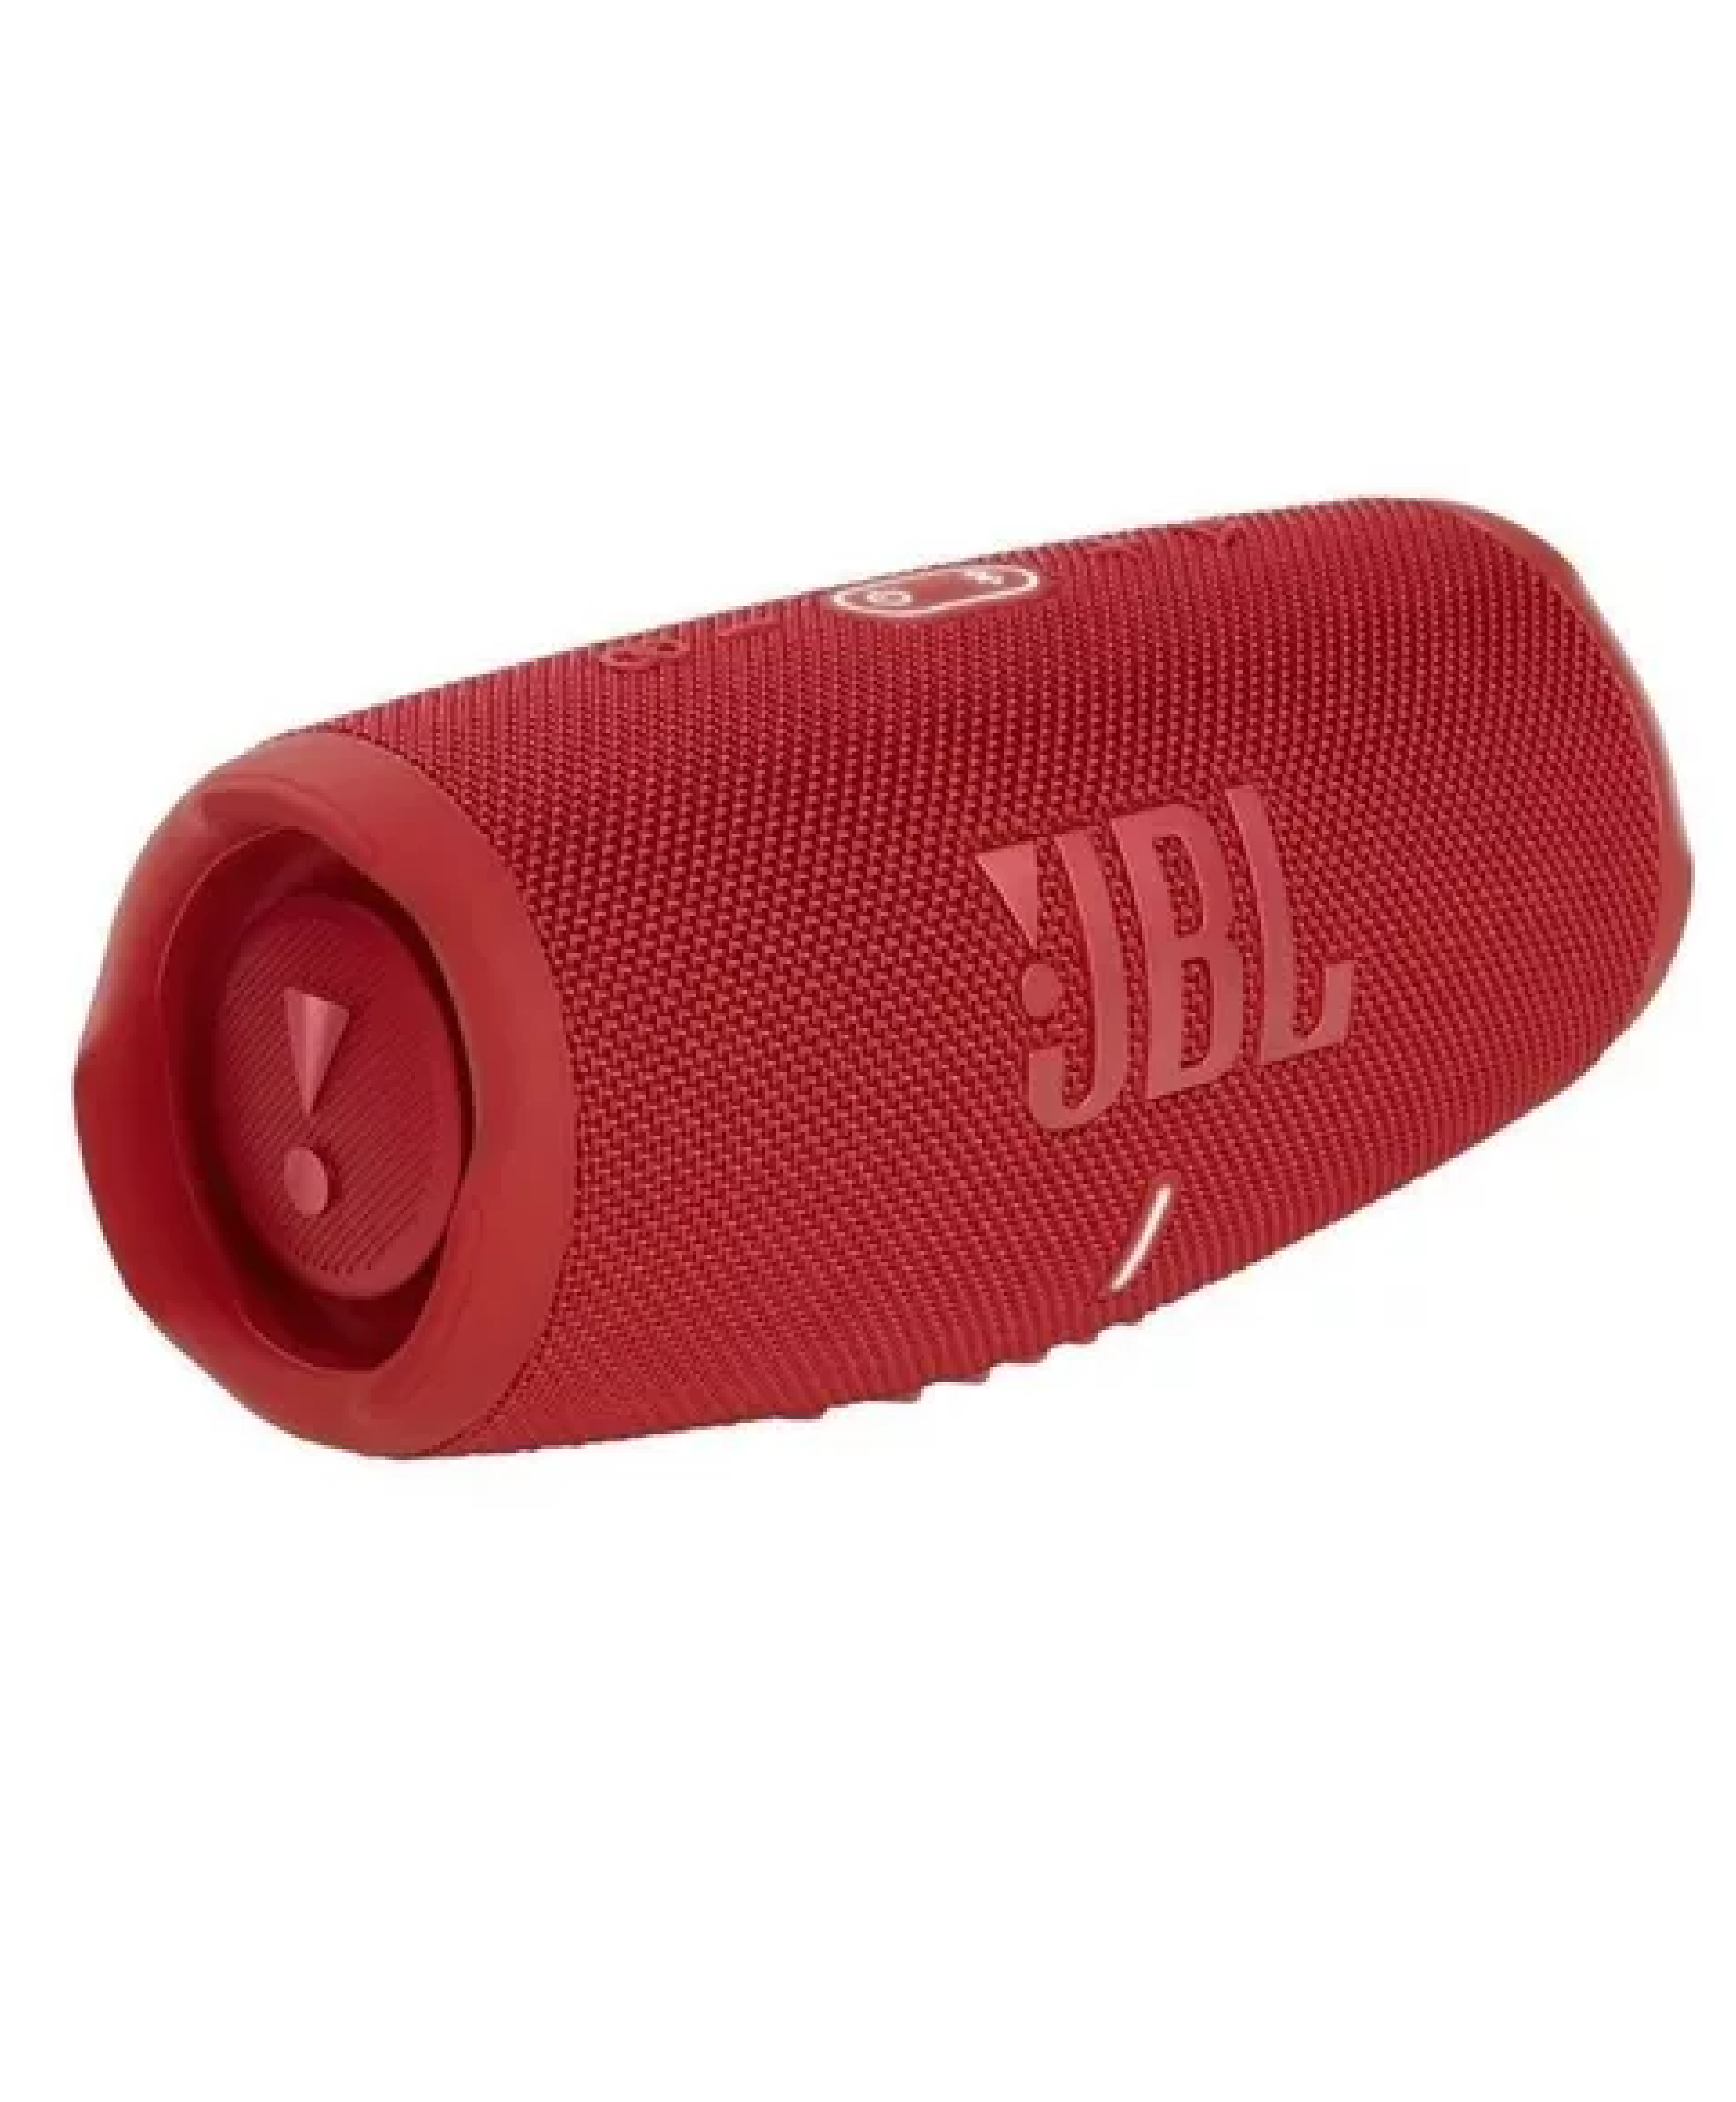 Parlante Jbl Charge 5 Portátil Con Bluetooth Waterproof Red 110v